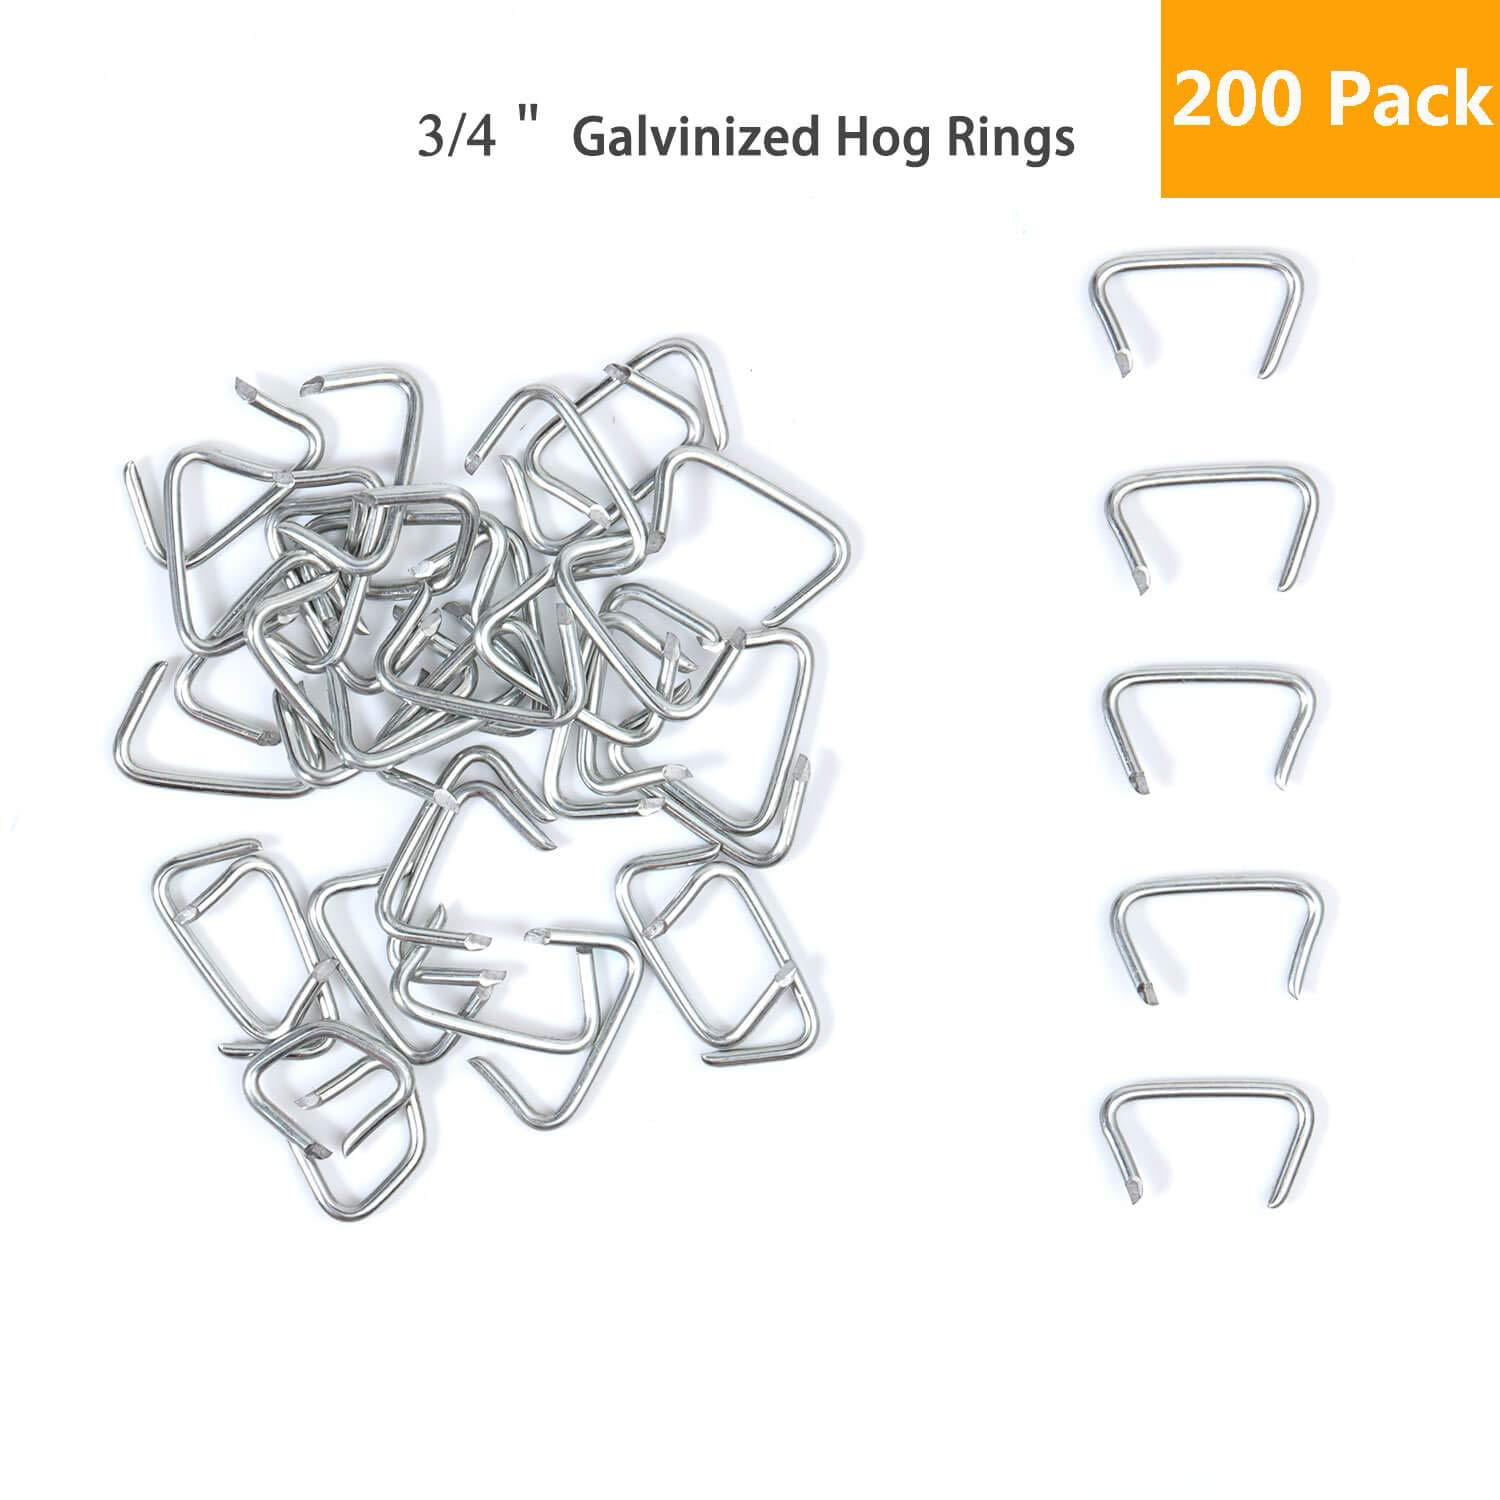 Professional Straight Hog Ring Pliers Set Upholstery Installation Kit 200 Rings 